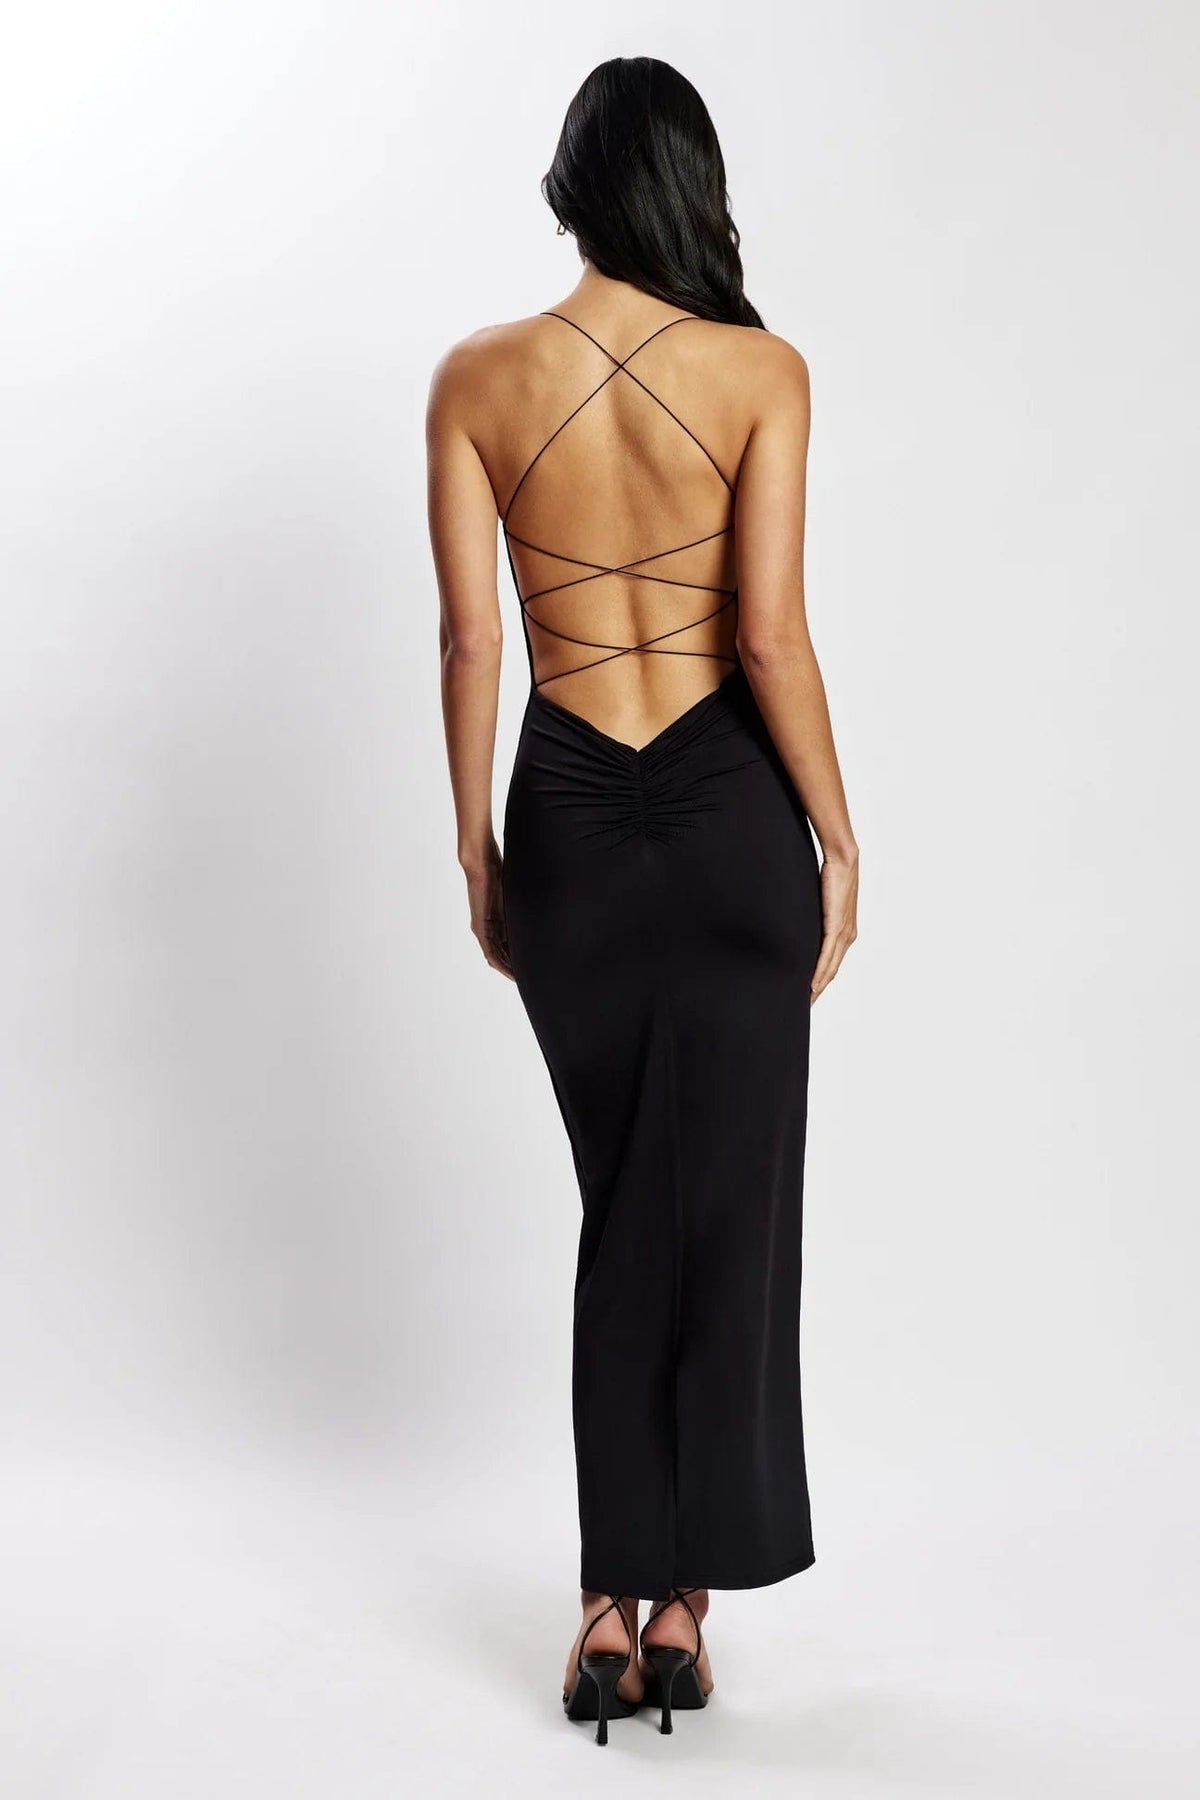 Discover the Latest Collection of Backless Dresses Online in India